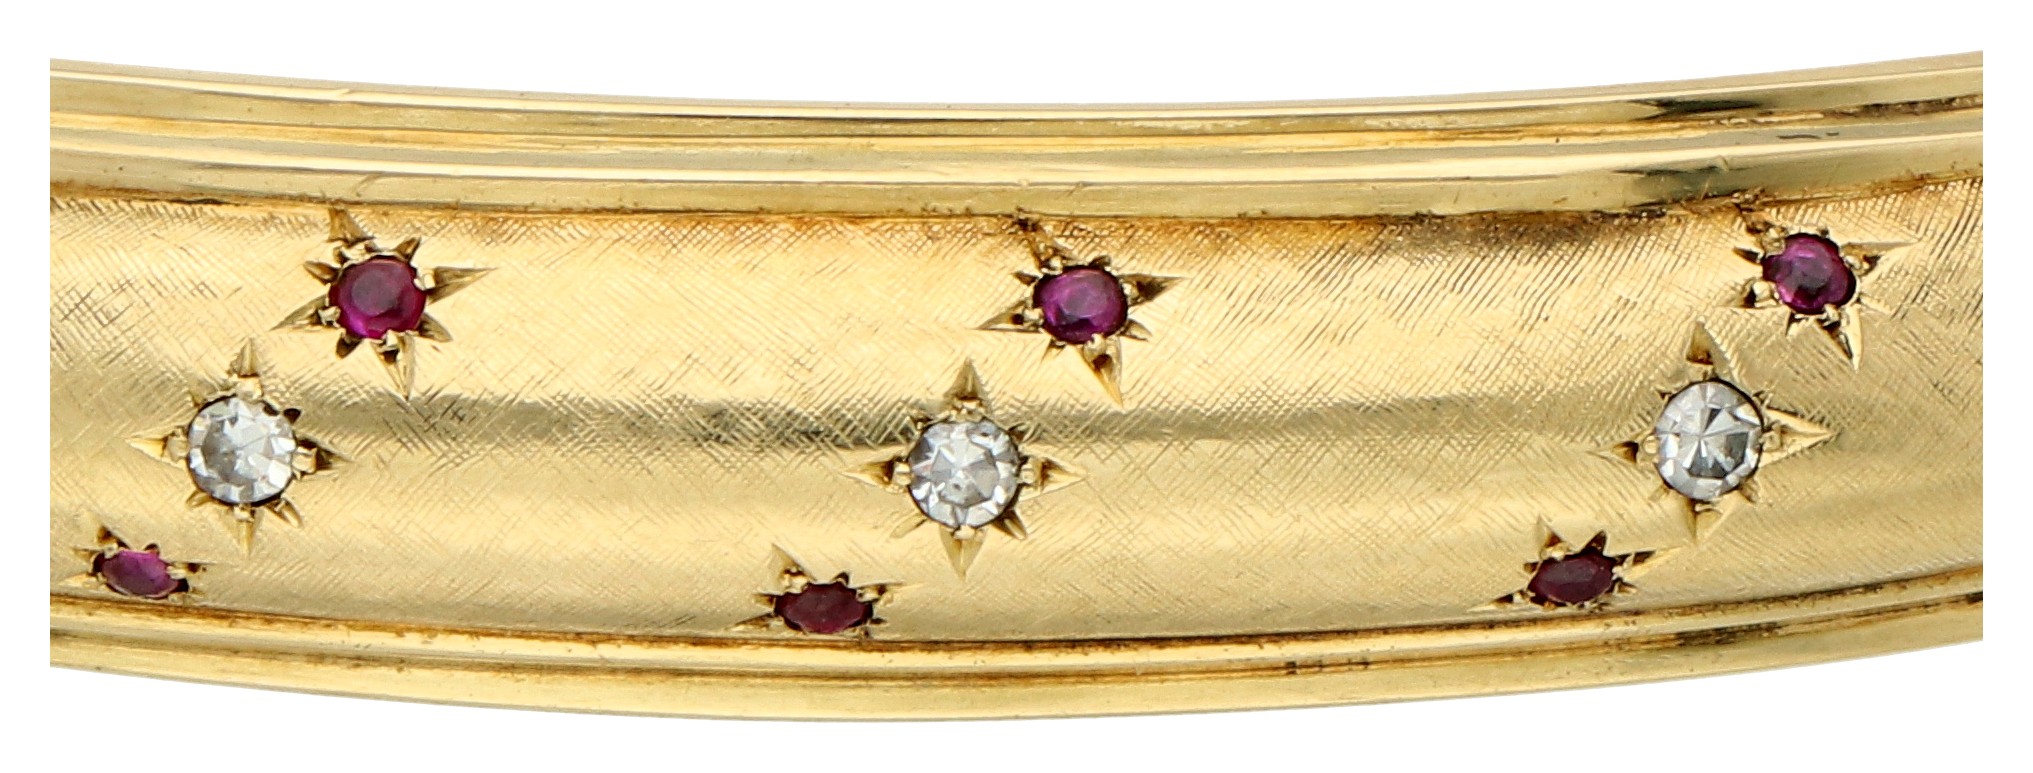 No Reserve - 14K Yellow gold bangle bracelet with diamond and synthetic ruby. - Image 2 of 3